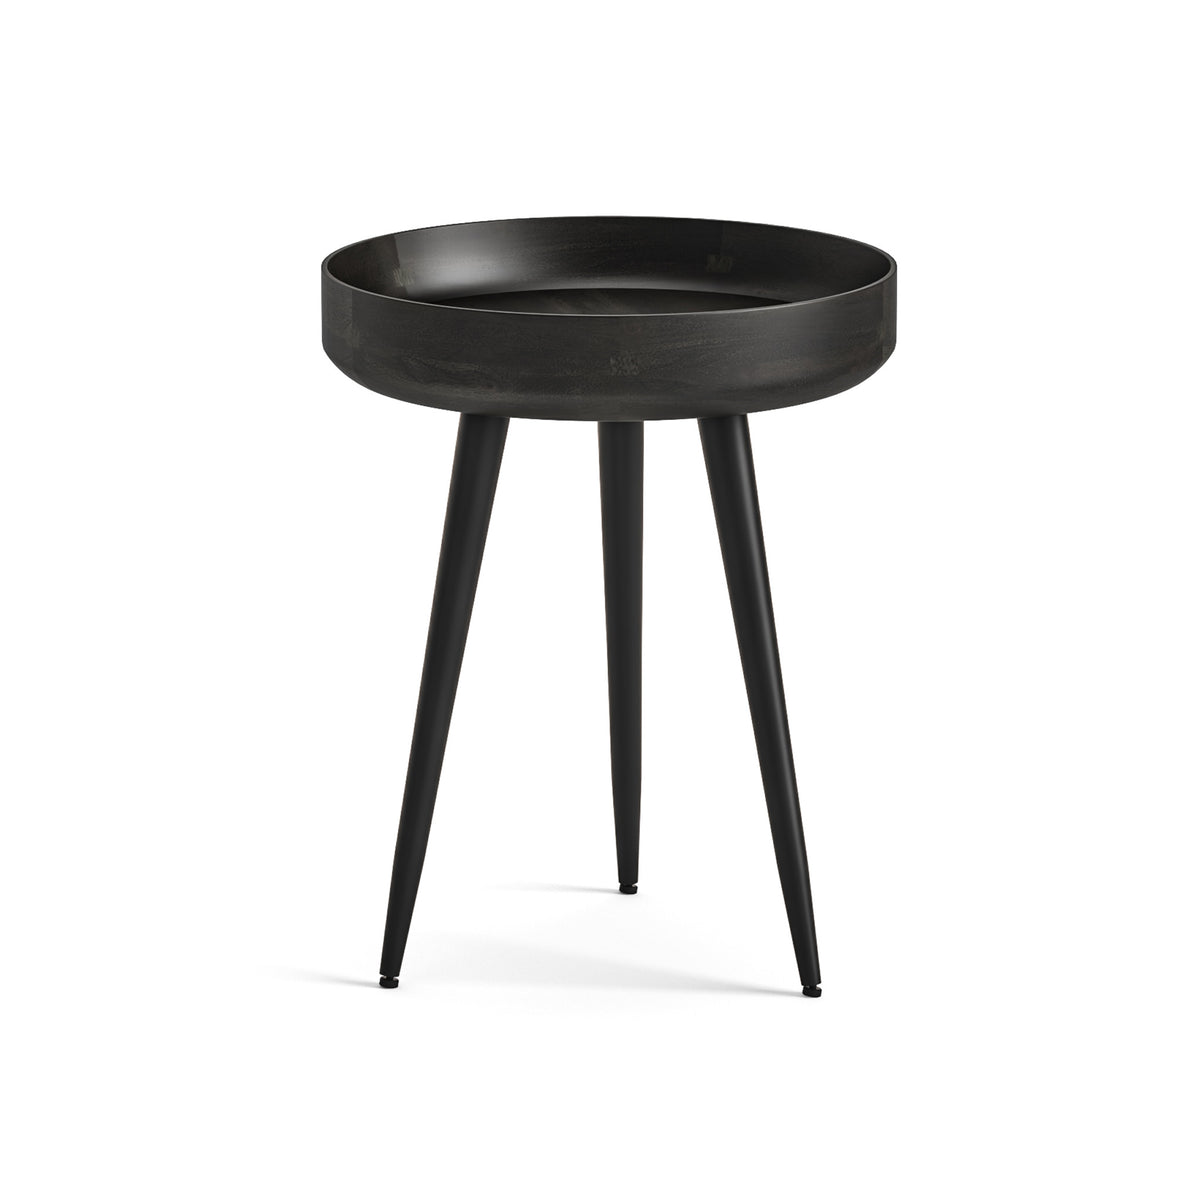 Boa Mango Wooden Round Black Side Table from Roseland Furniture